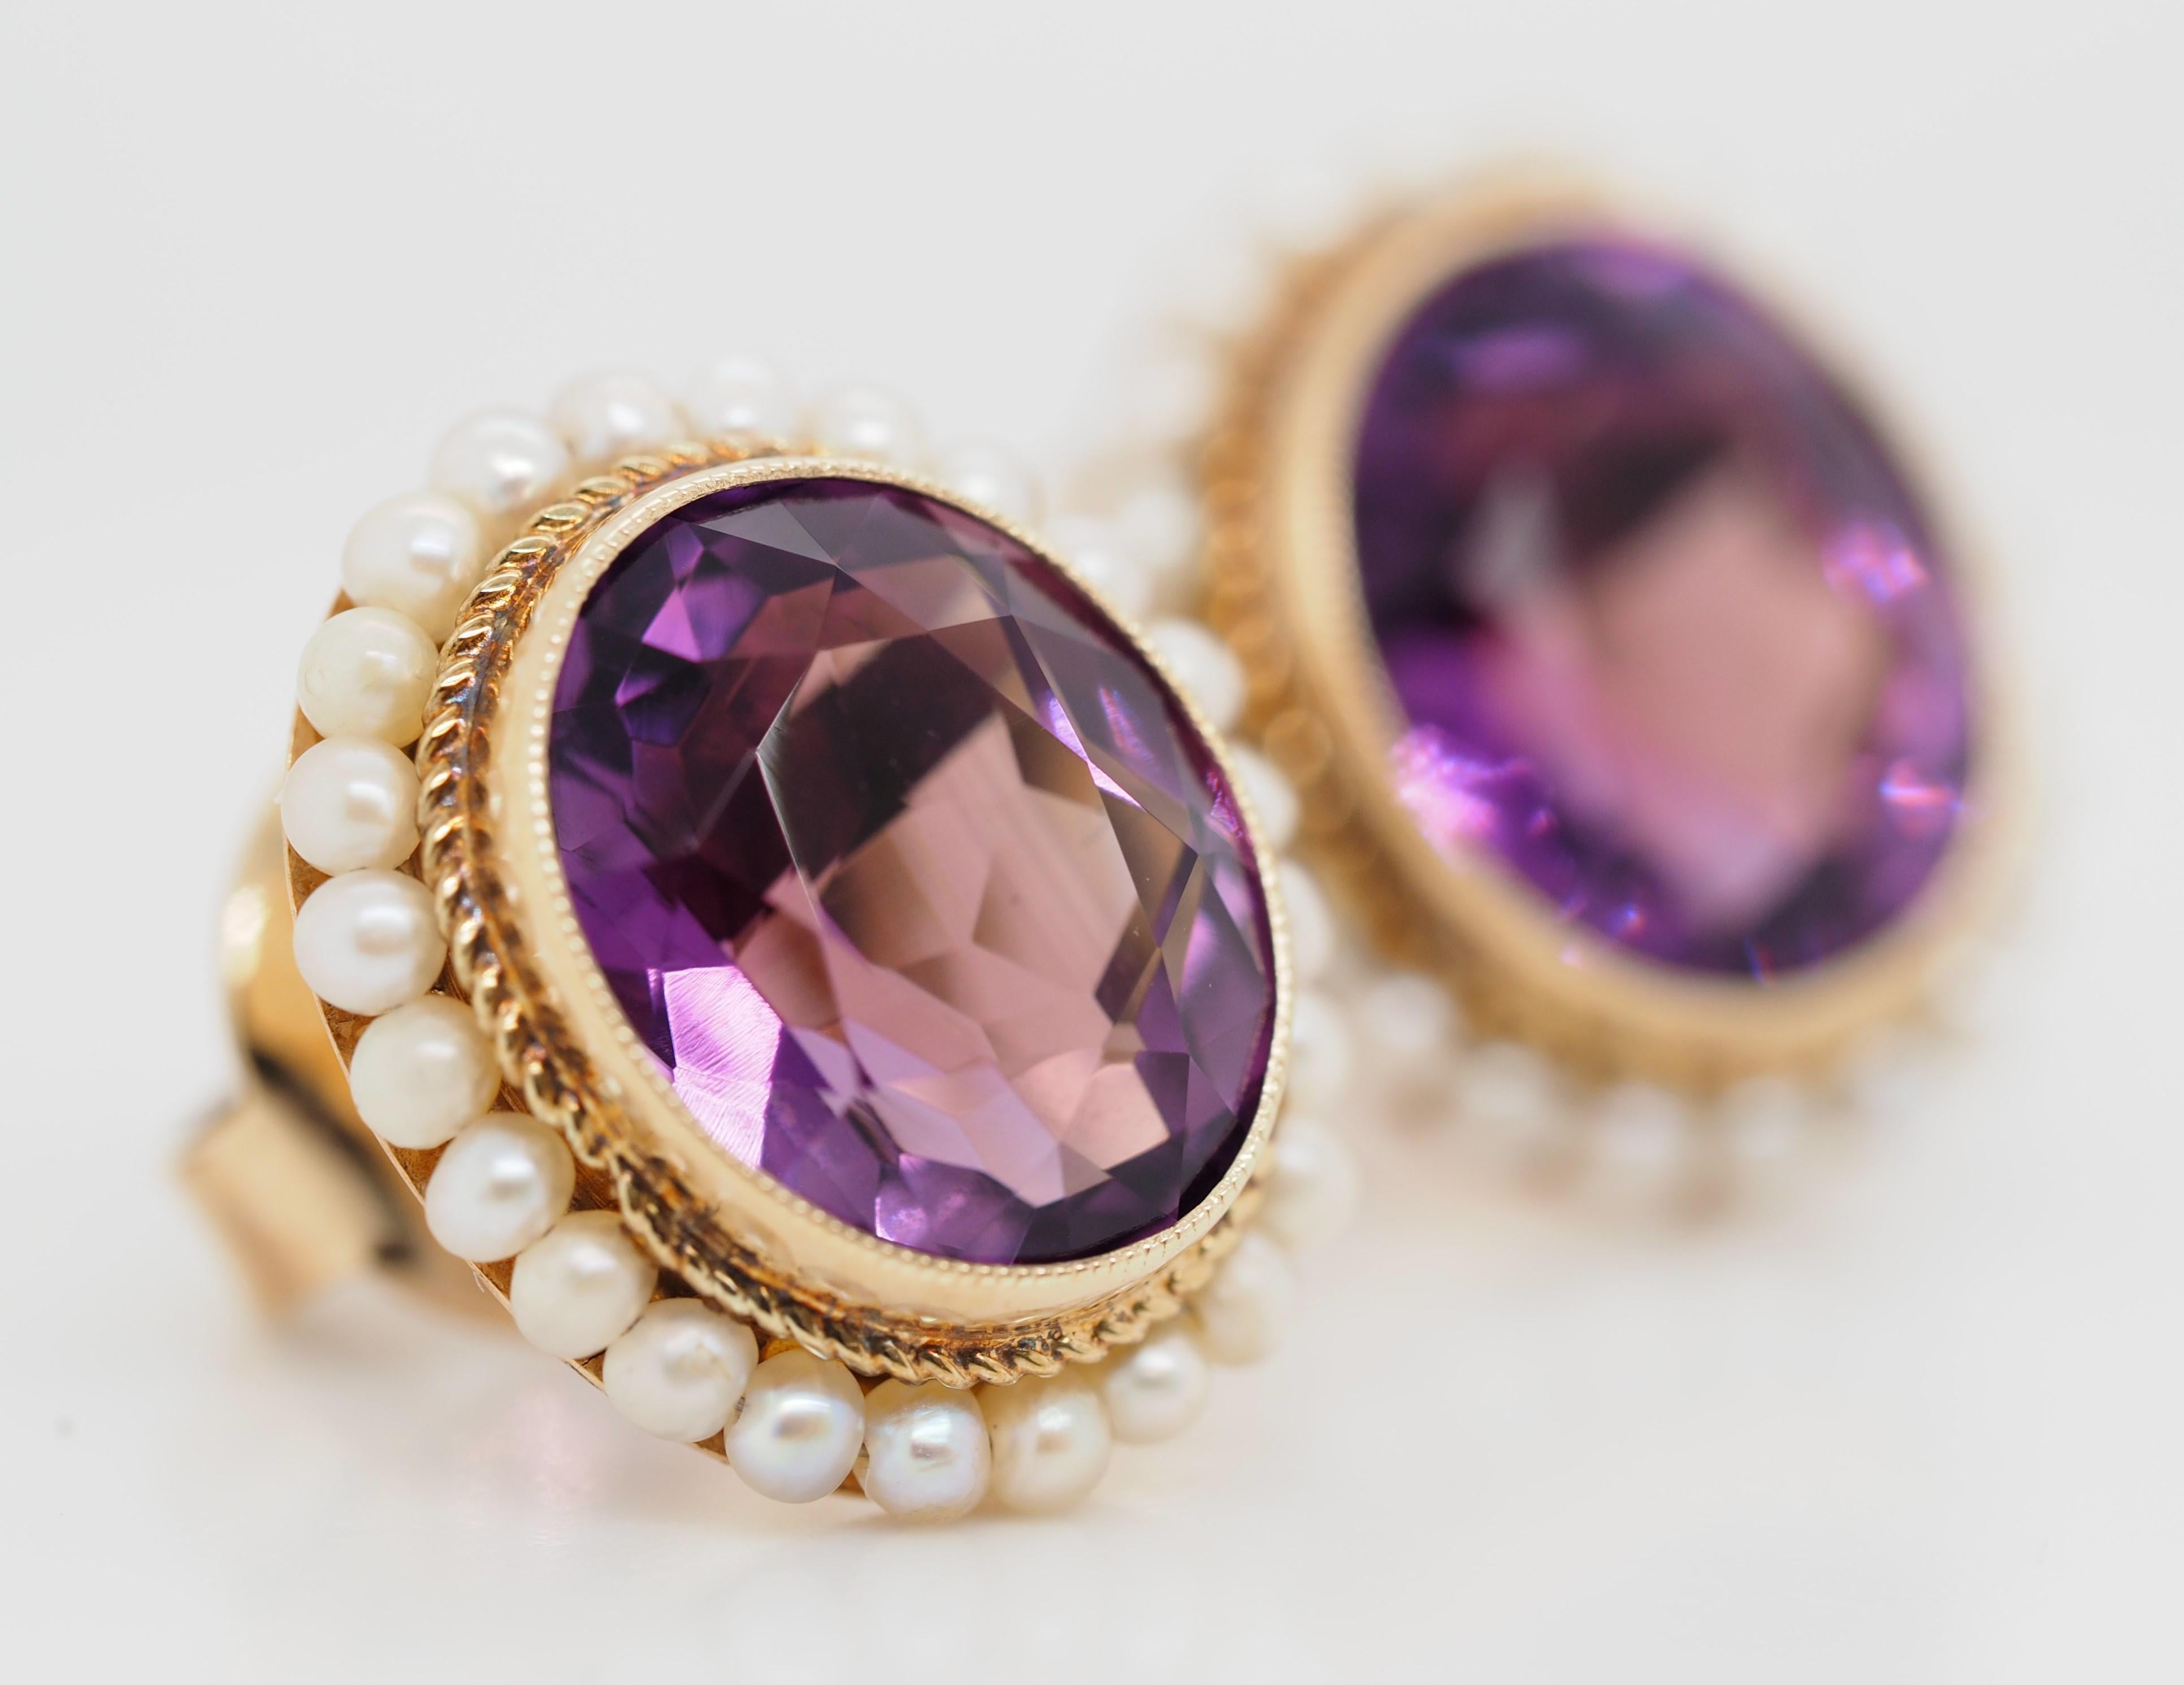 Victorian 14k Yellow Gold Oval Amethyst Earrings Bezel Set and Framed by Pearls